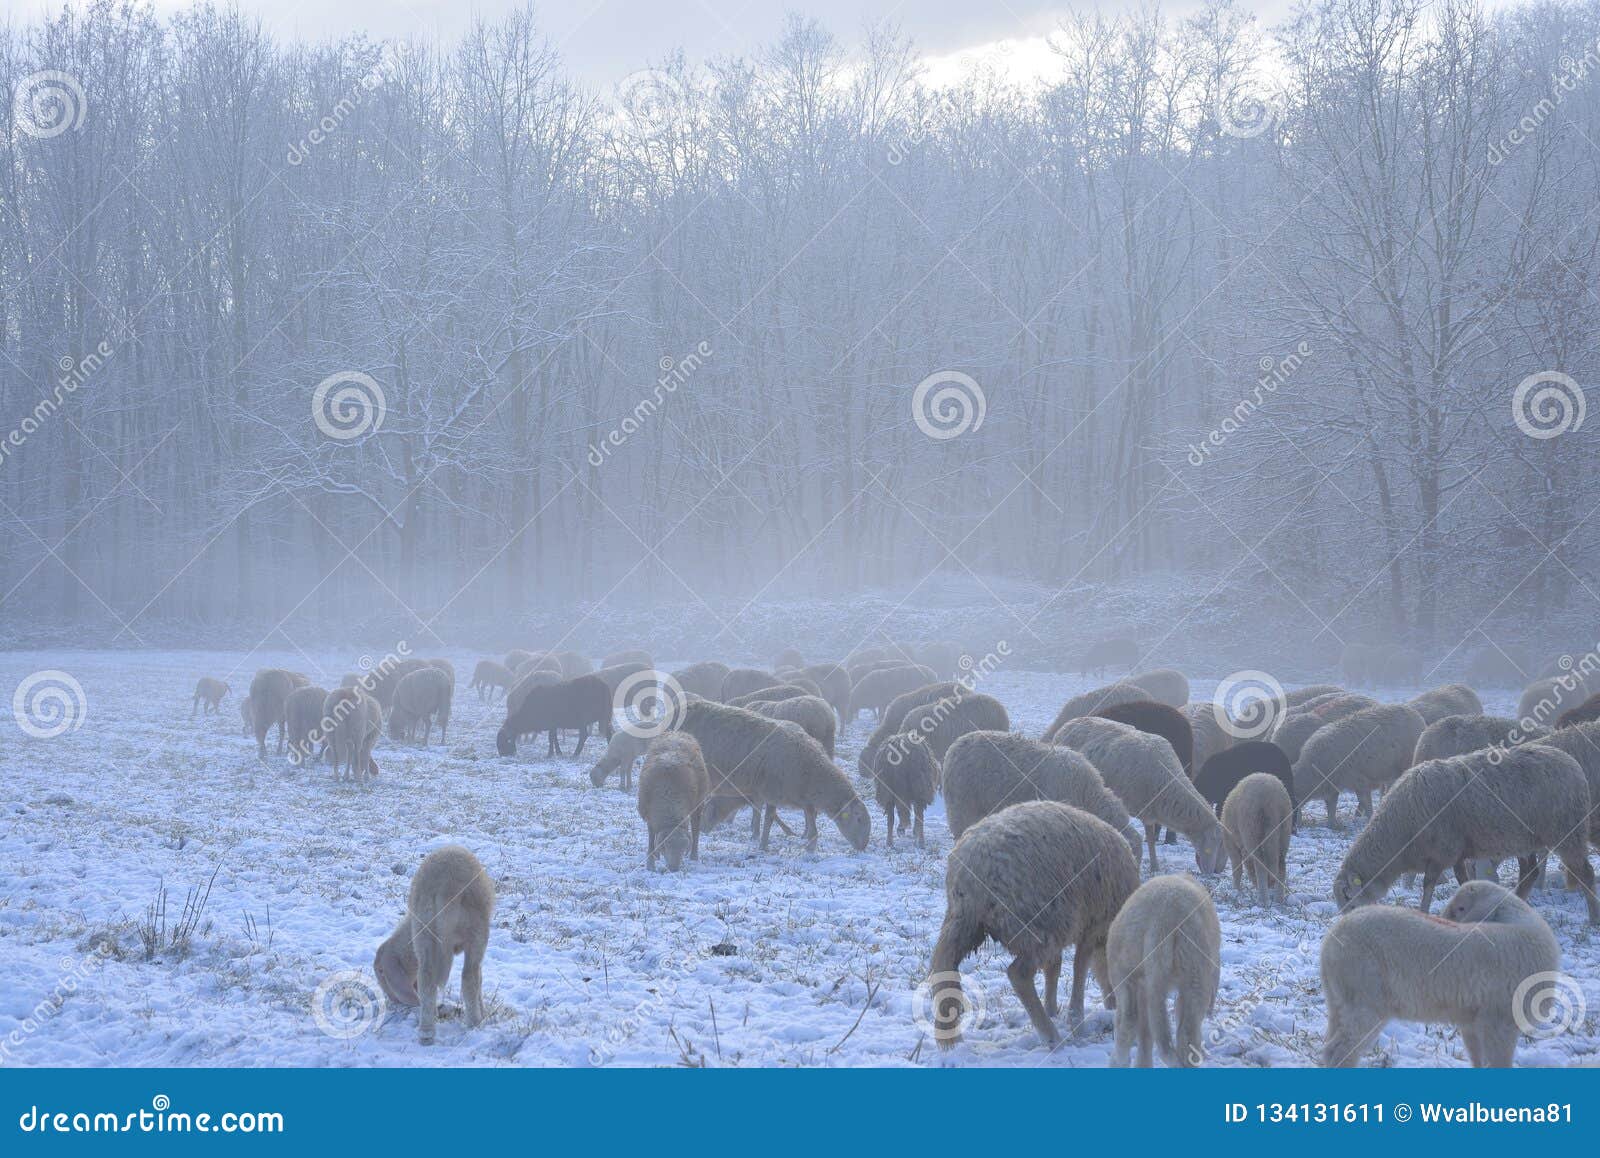 flock of sheep grazes on a snow-covered field